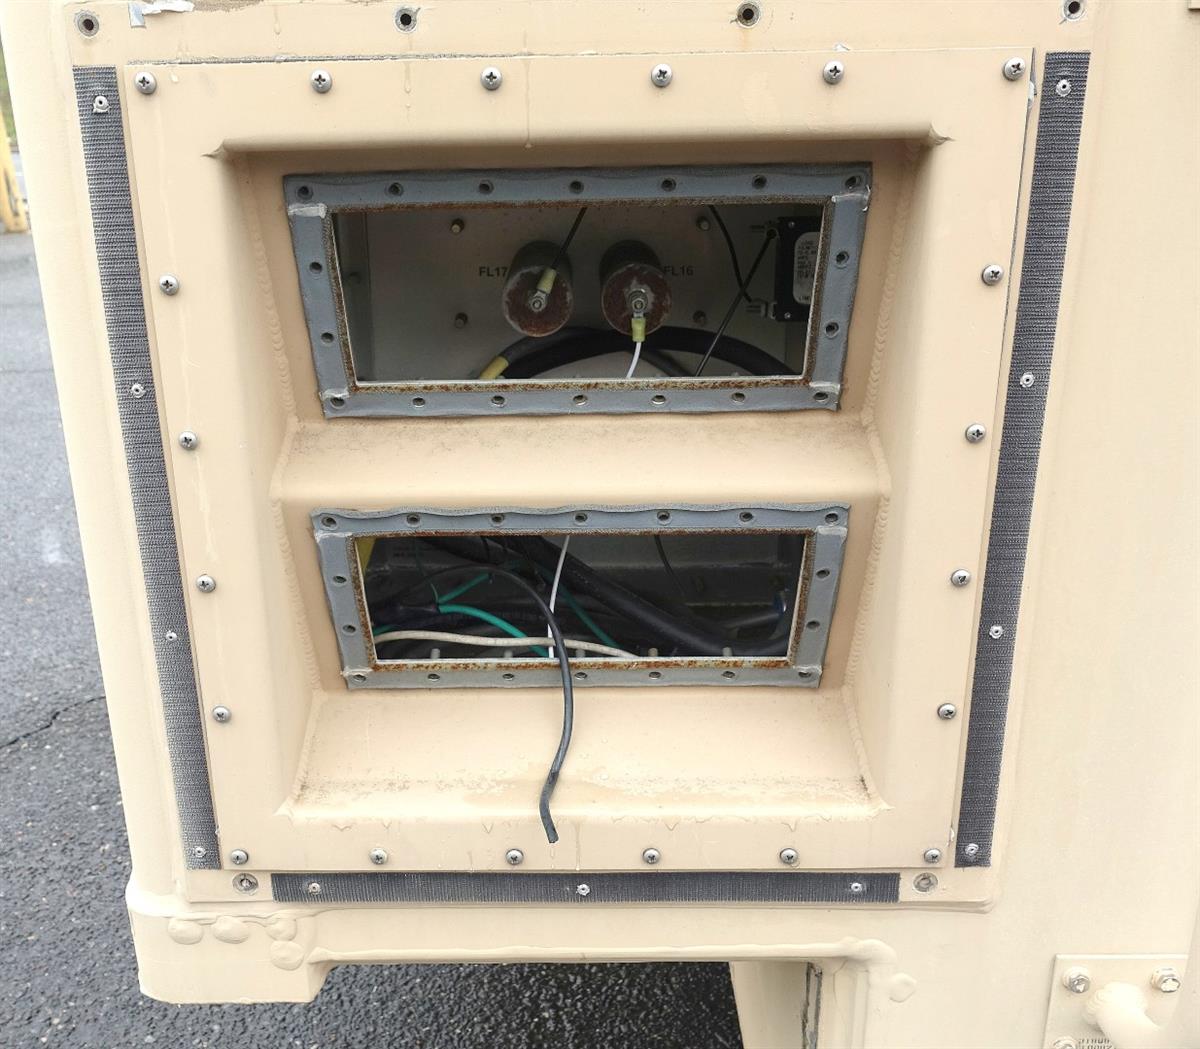 HM-909 | HM-909 S-788 Shielded Electrical Equipment Shelter for HMMWV USED (10).JPG